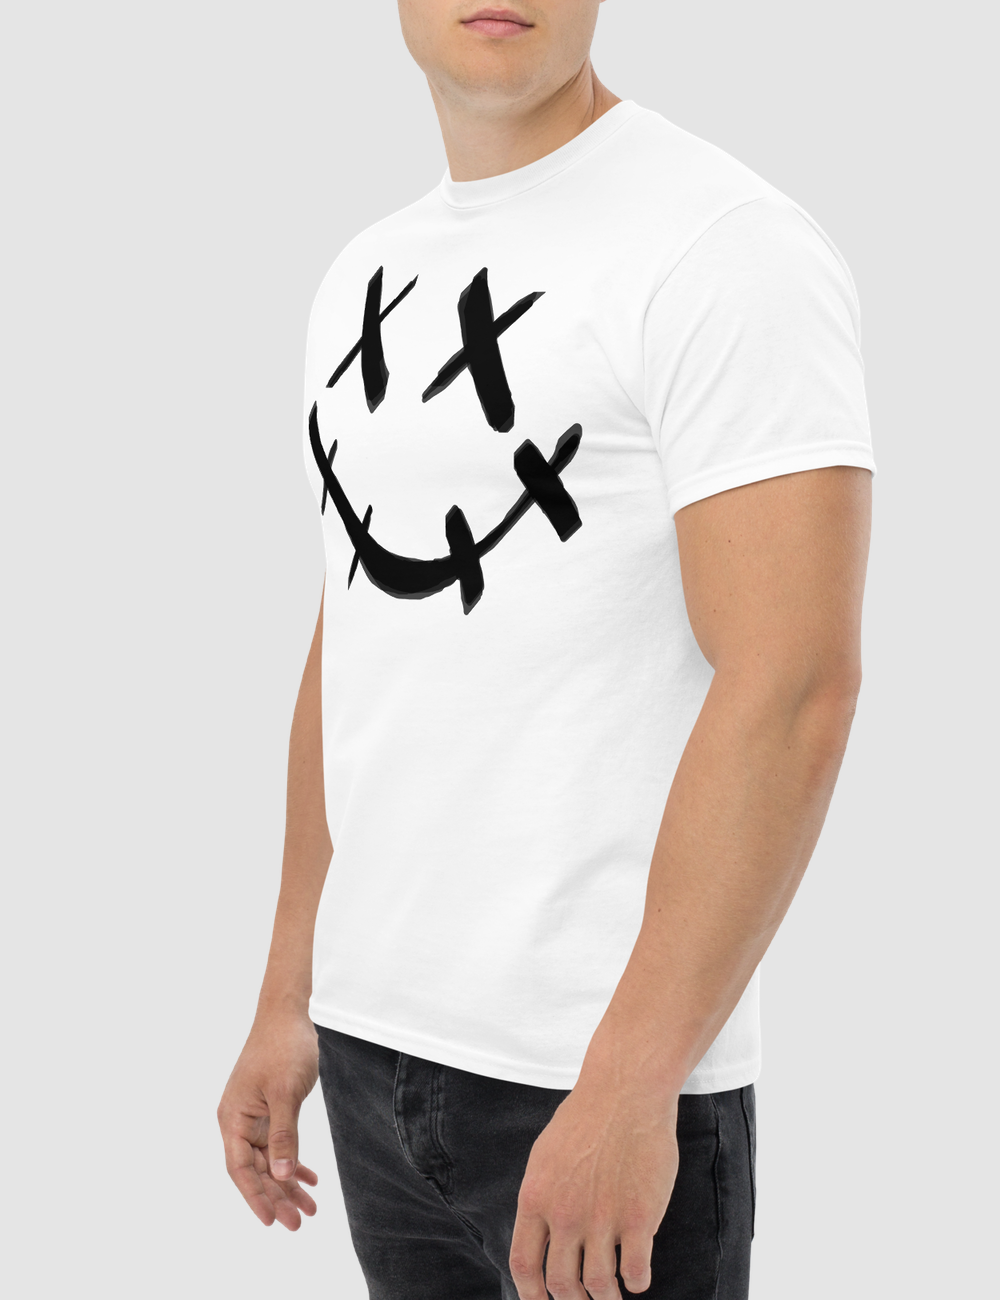 Stitched Smiley Face Men's Classic T-Shirt OniTakai